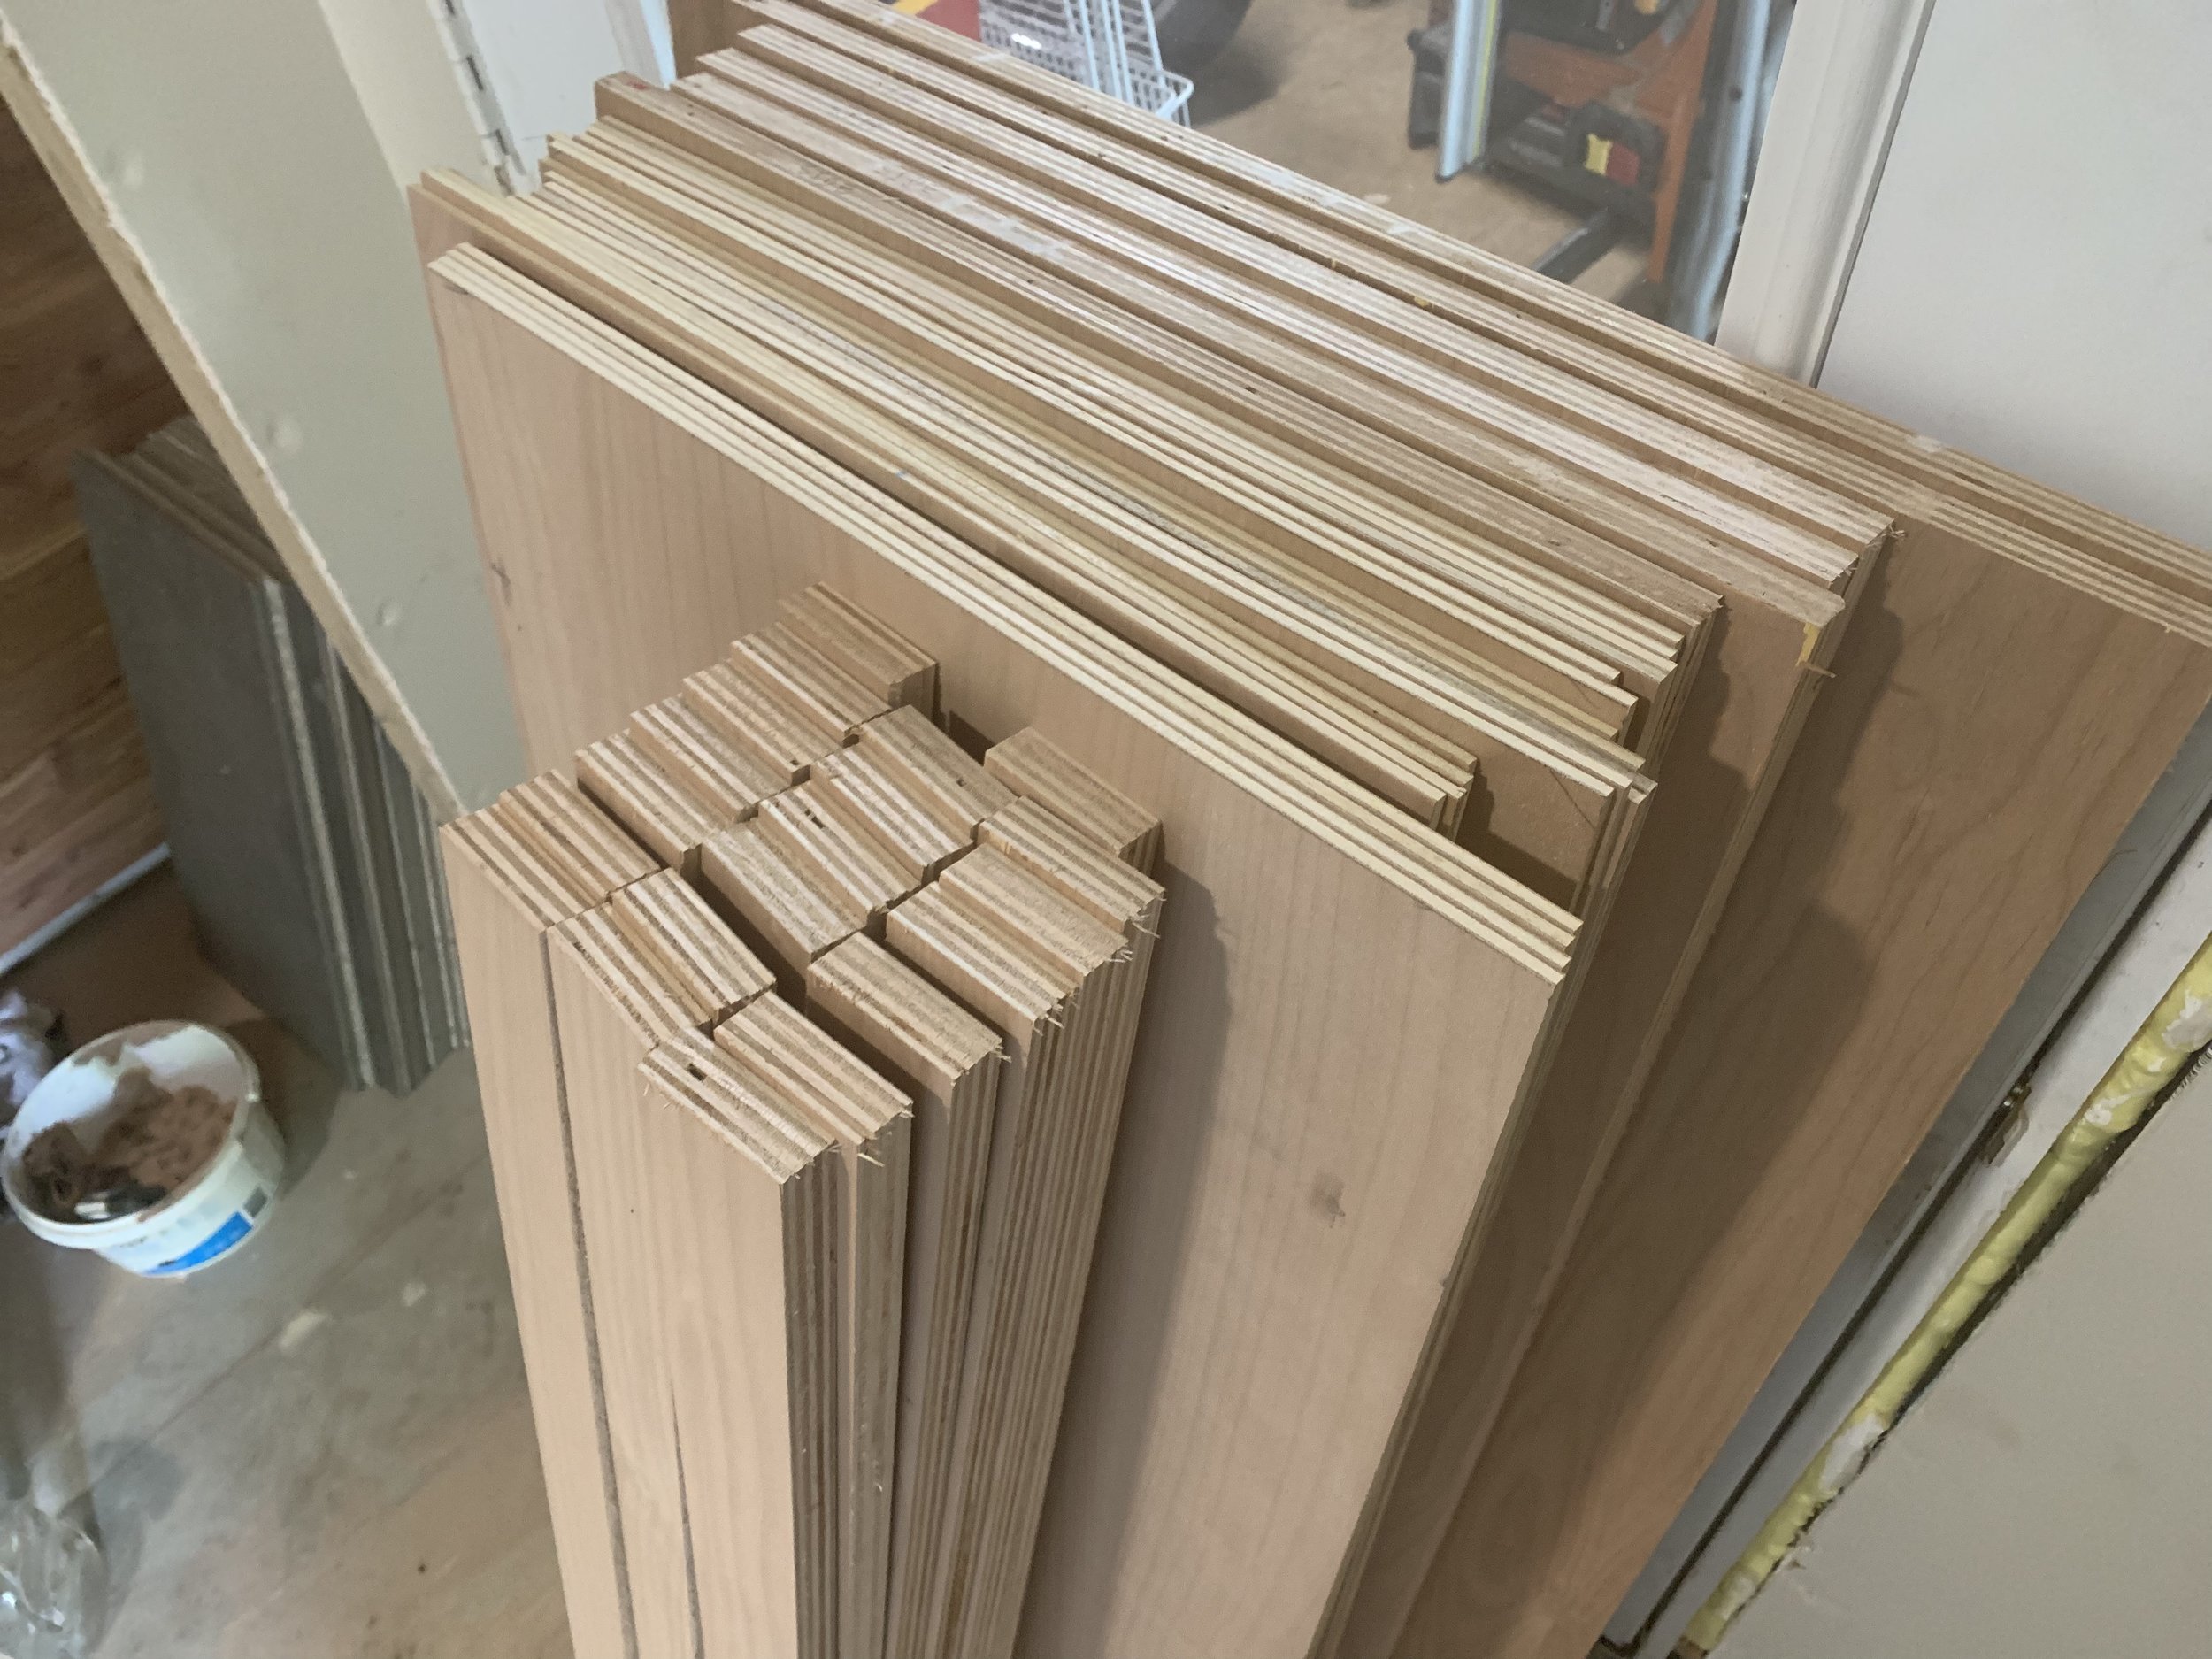  All of our pieces are ready! The thick pieces toward the back are the sides and the back of the diffuser. The thin pieces are the dividers. The really narrow but thick pieces in the front will be placed in between the dividers at specific depths.&nb